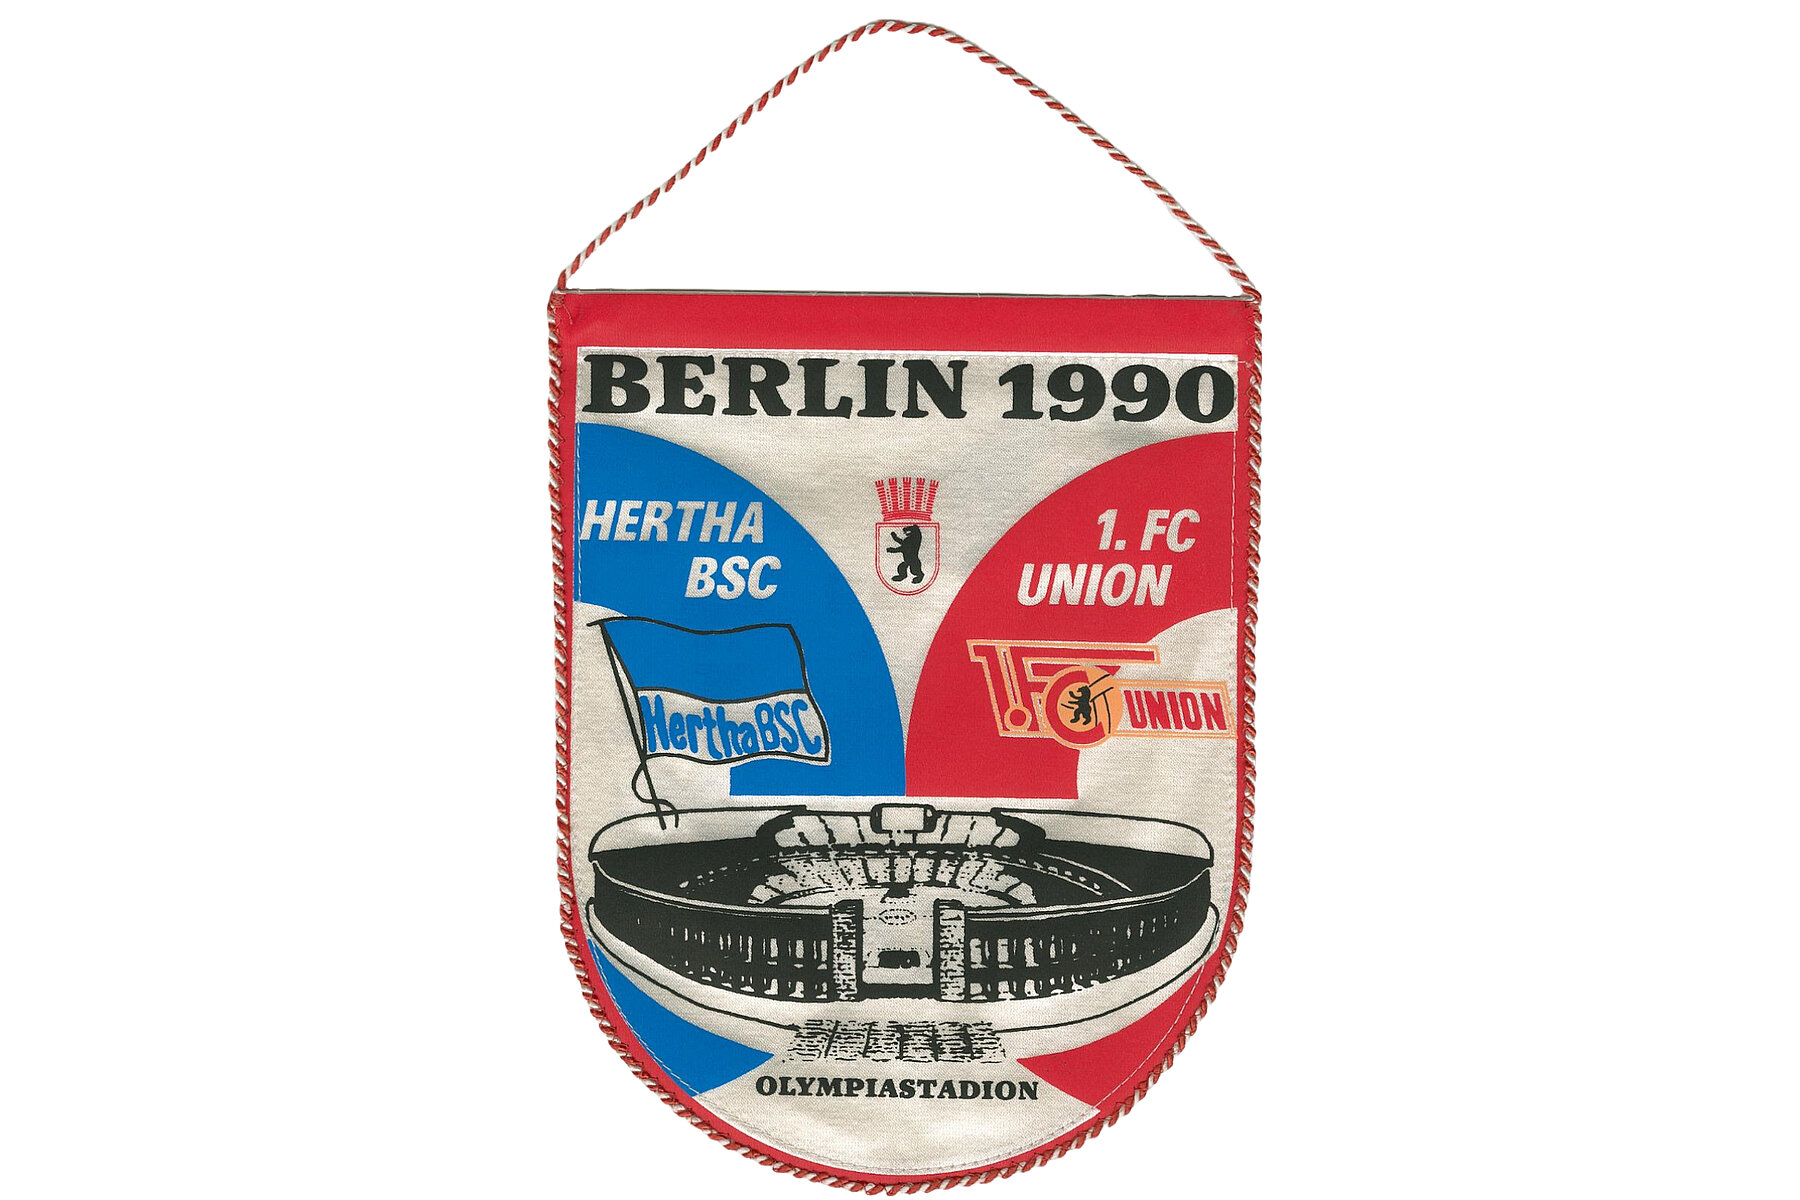 Pennant with a central image of the Olympic Stadium. On the left side there is blue advertising for Hertha, on the right side red advertising for Union. At the top is the lettering: Berlin 1990.